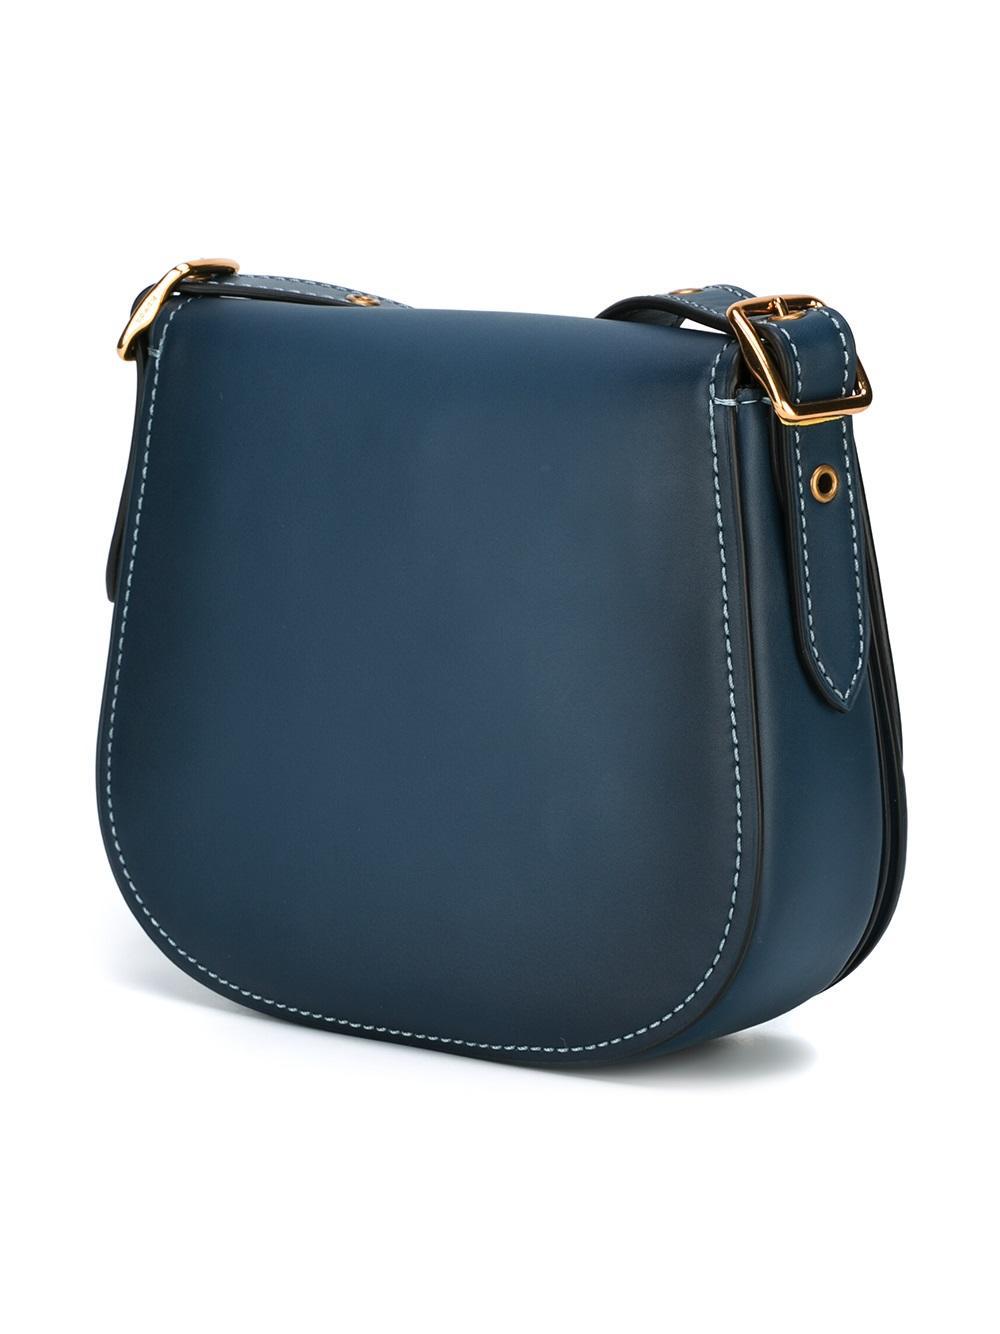 COACH Stitching Detail Saddle Bag in Blue | Lyst